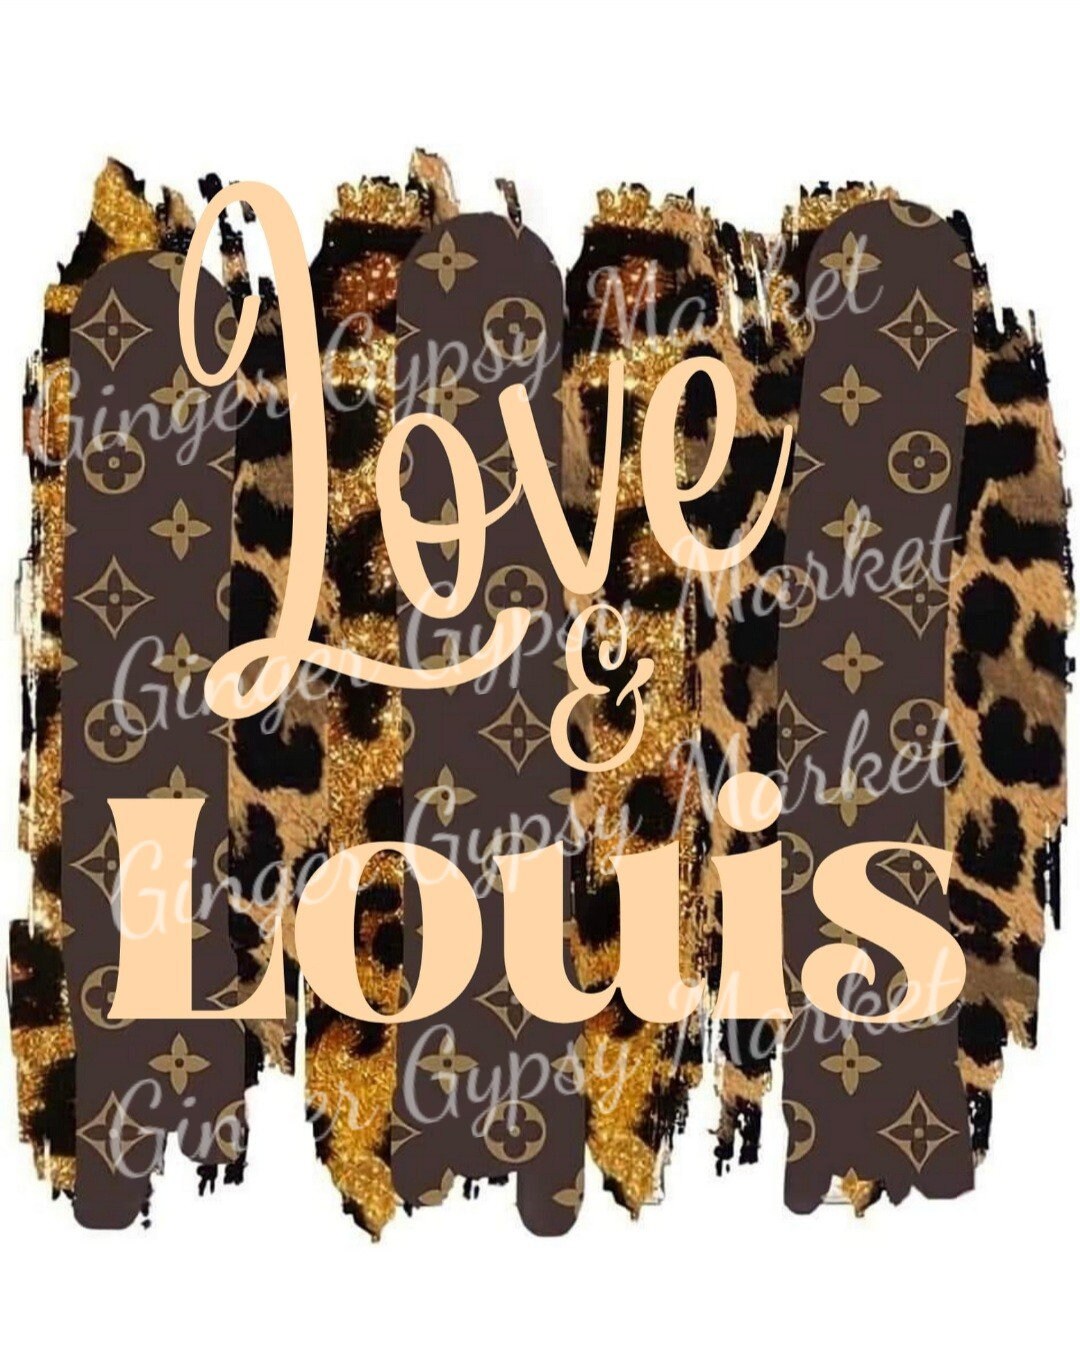 Dripping LV Leopard INSTANT DOWNLOAD print file PNG